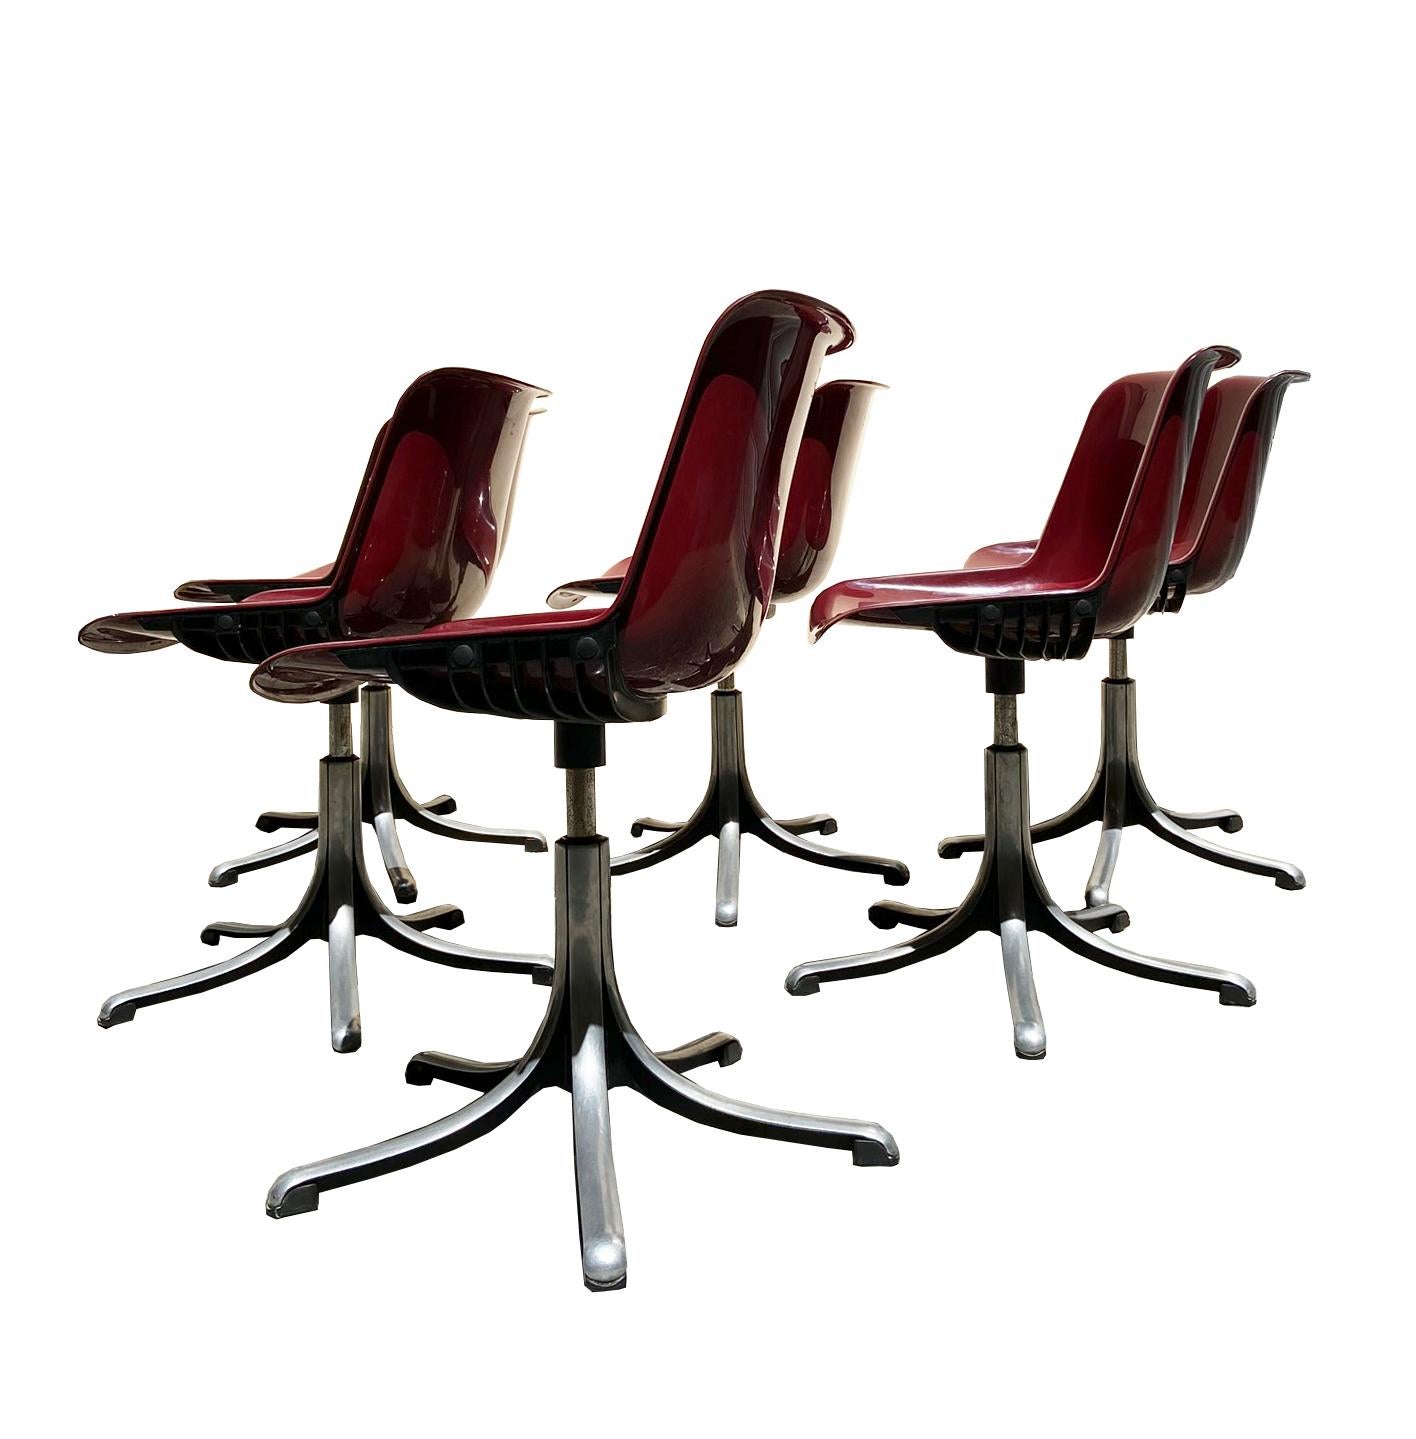 Set of six Modus chairs from the 1970s by the Italian designer Osvaldo Borsani for Tecno in dark red color equipped with an aluminum casting base and a plastic shell.